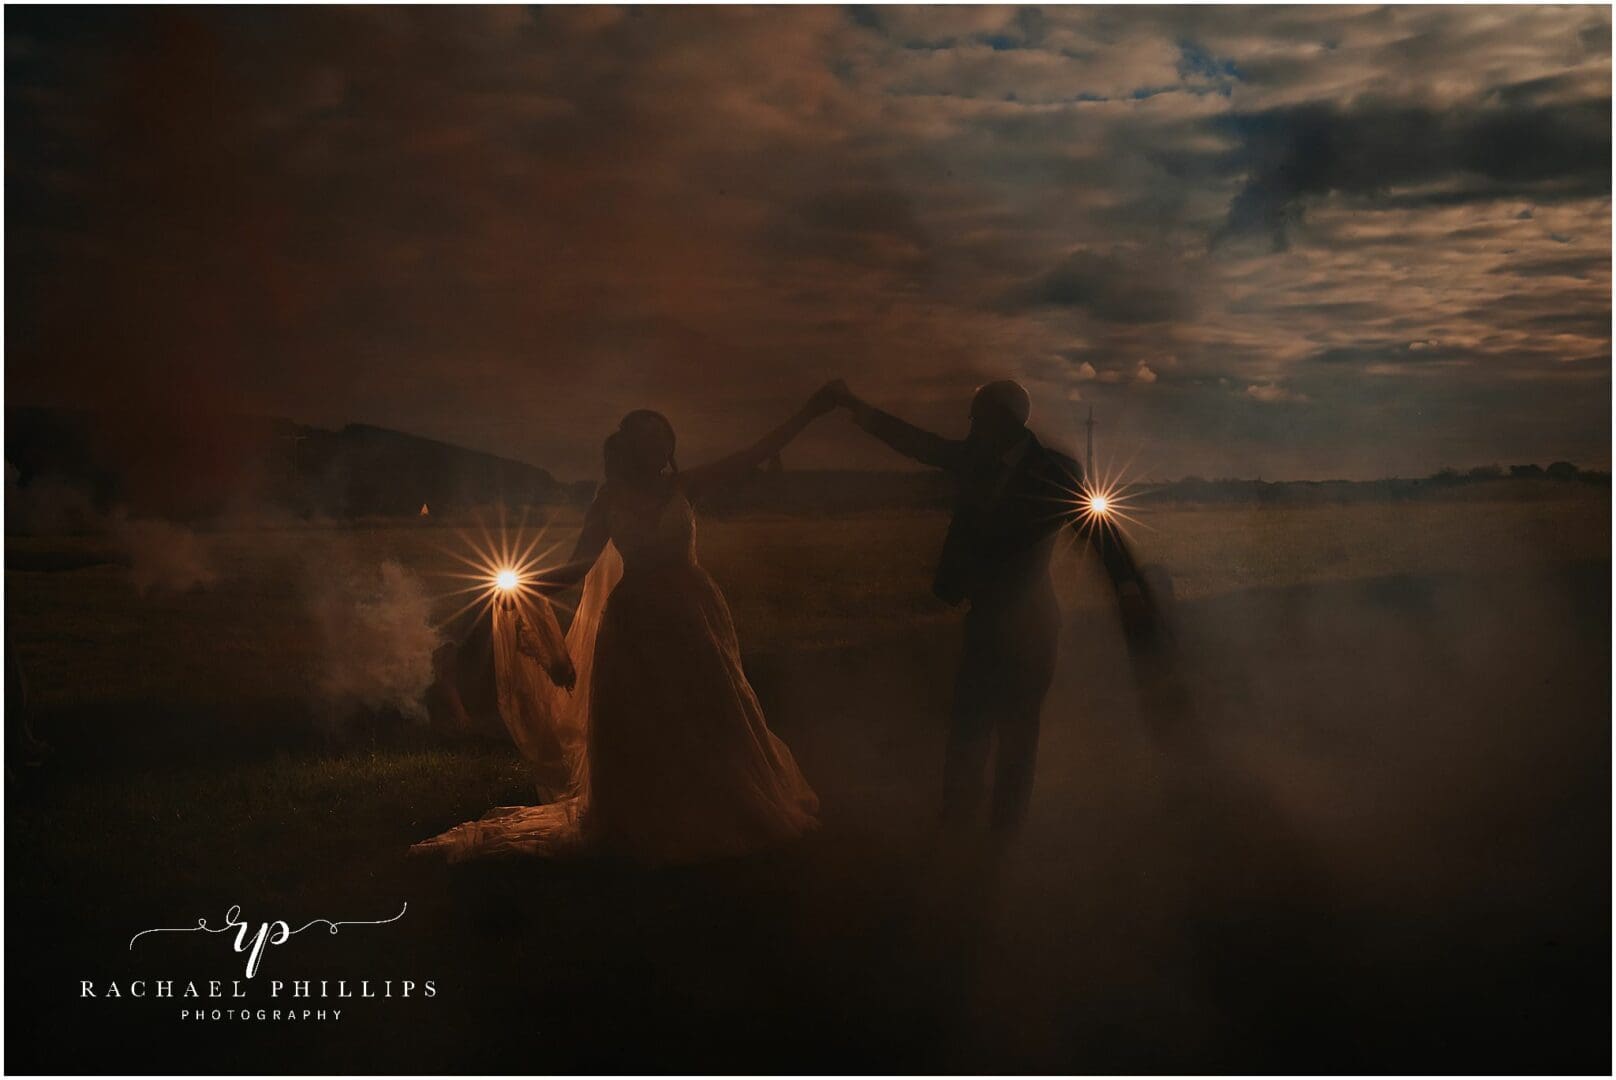 creative dark photo using smoke booms, the picture of a bride and groom dancing in the smoke on their wedding day